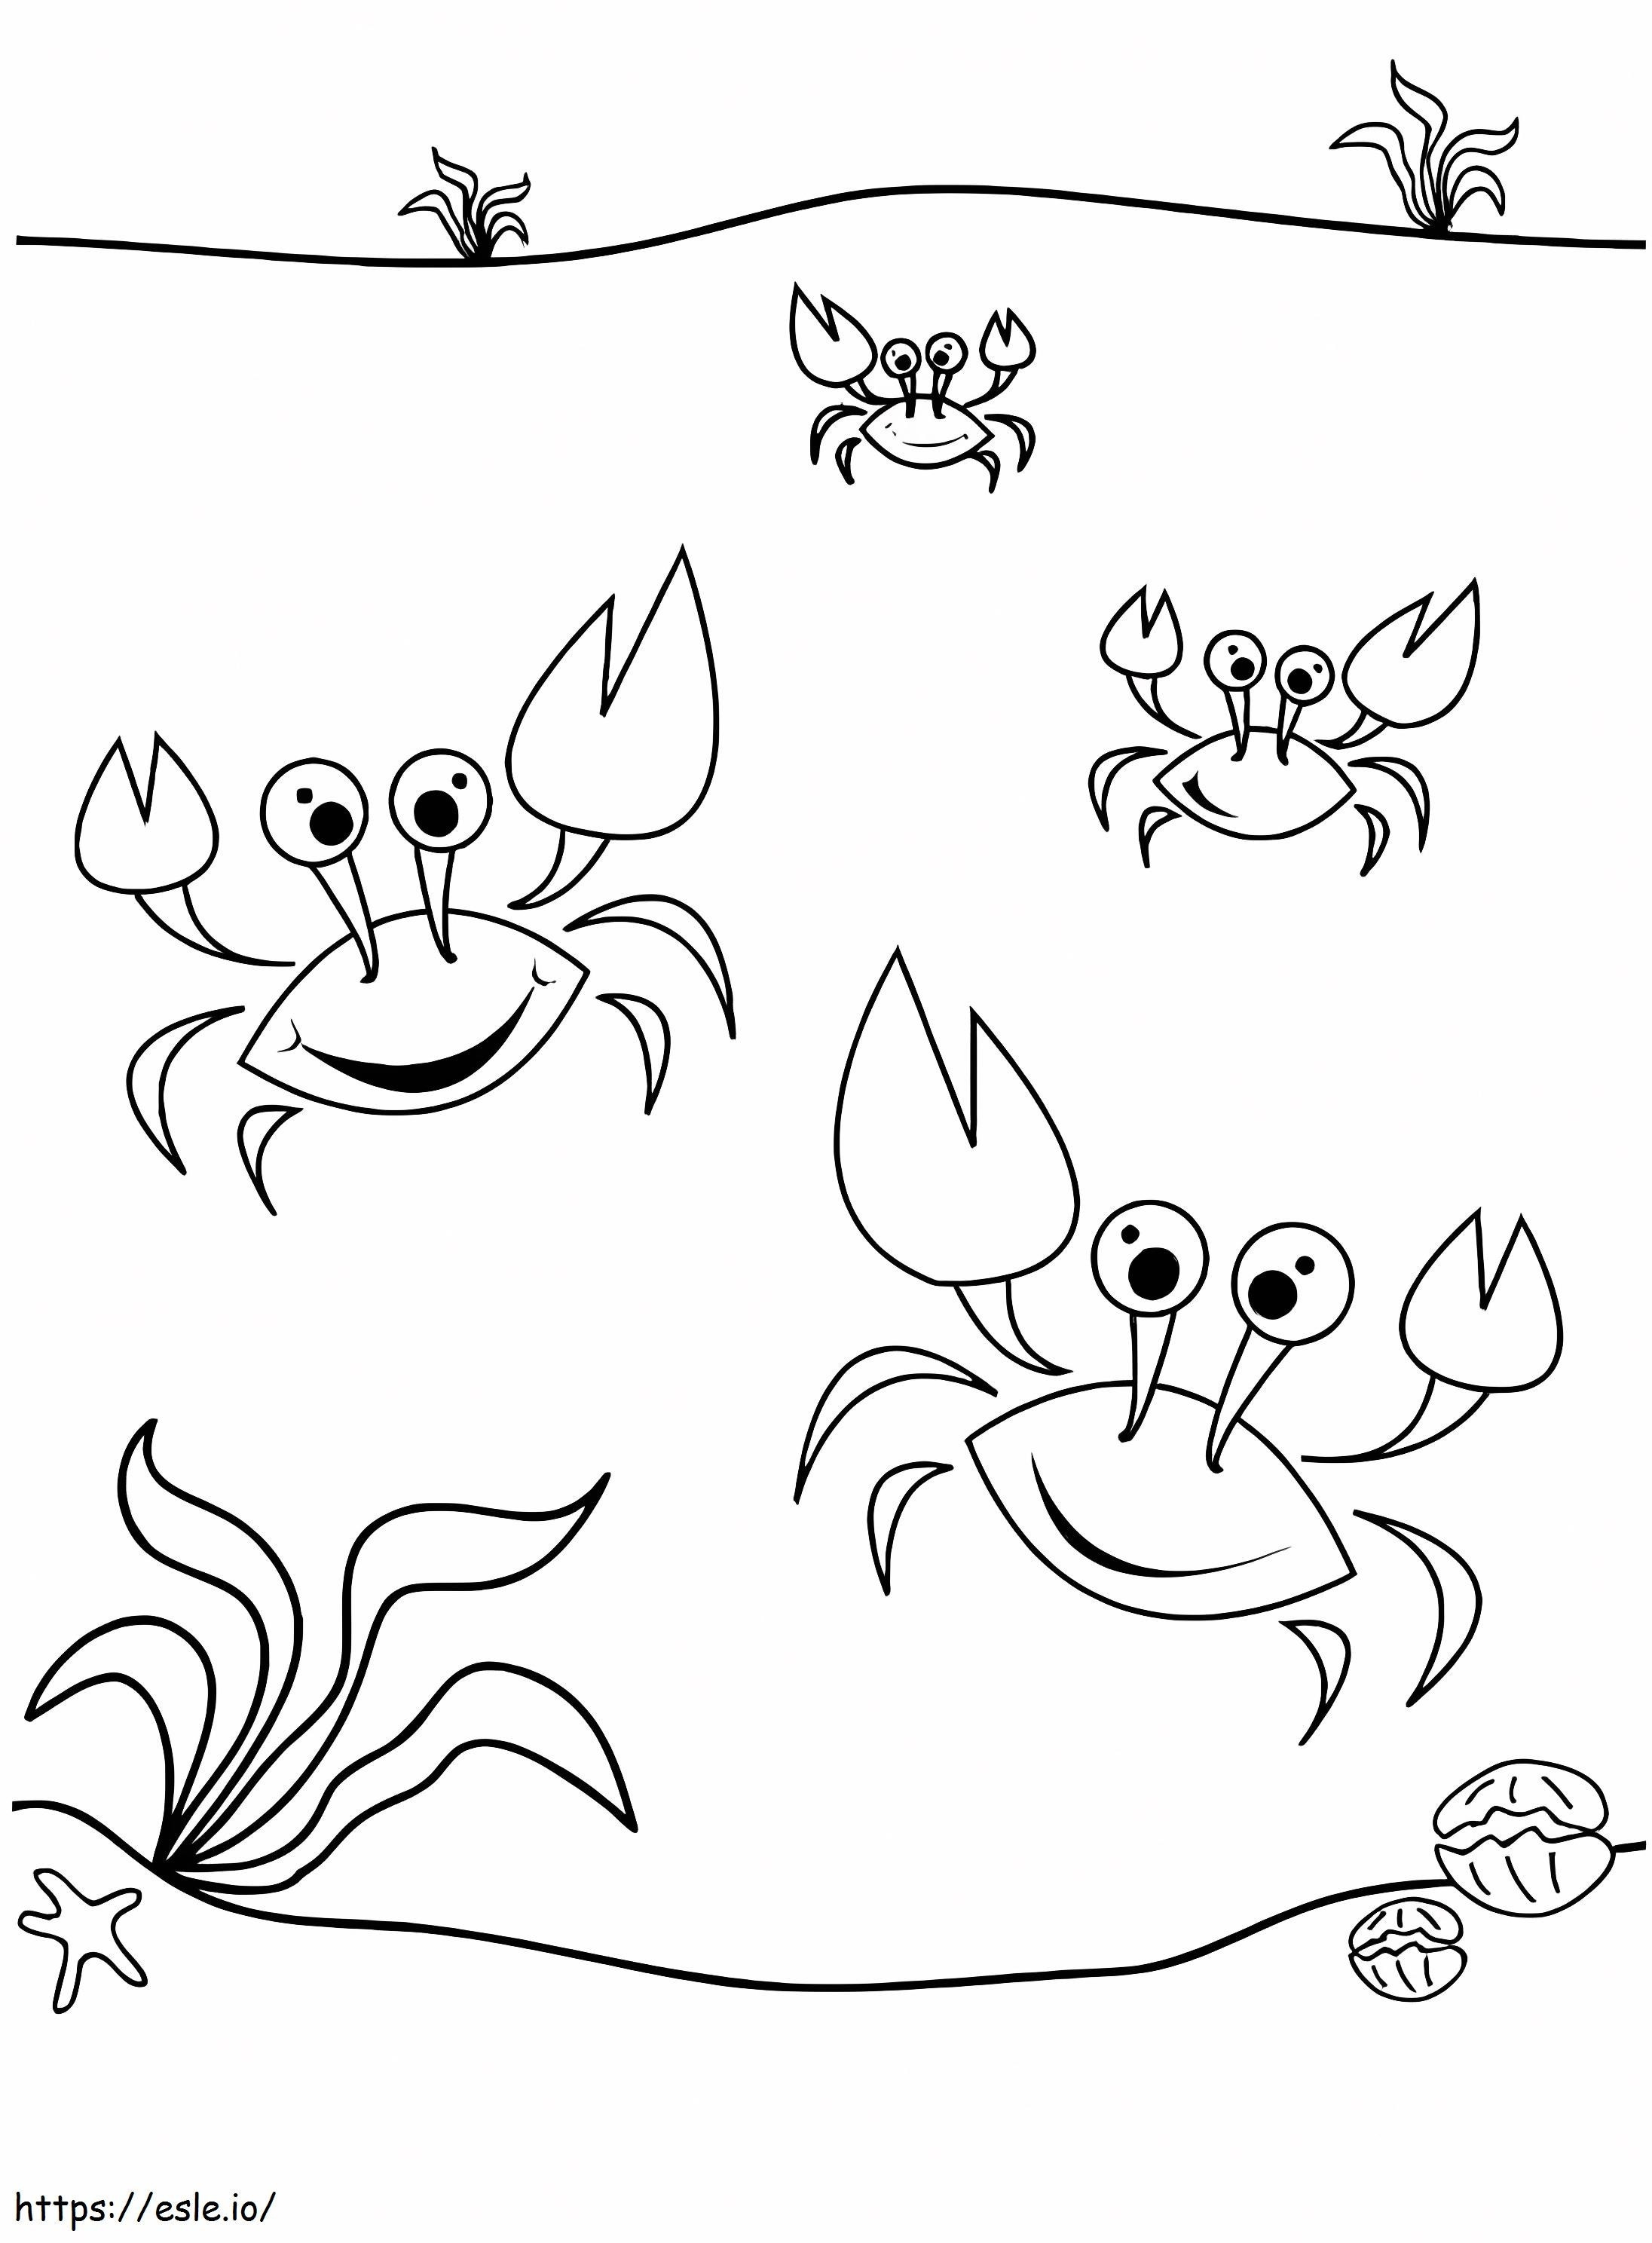 Four Dancing Crabs coloring page